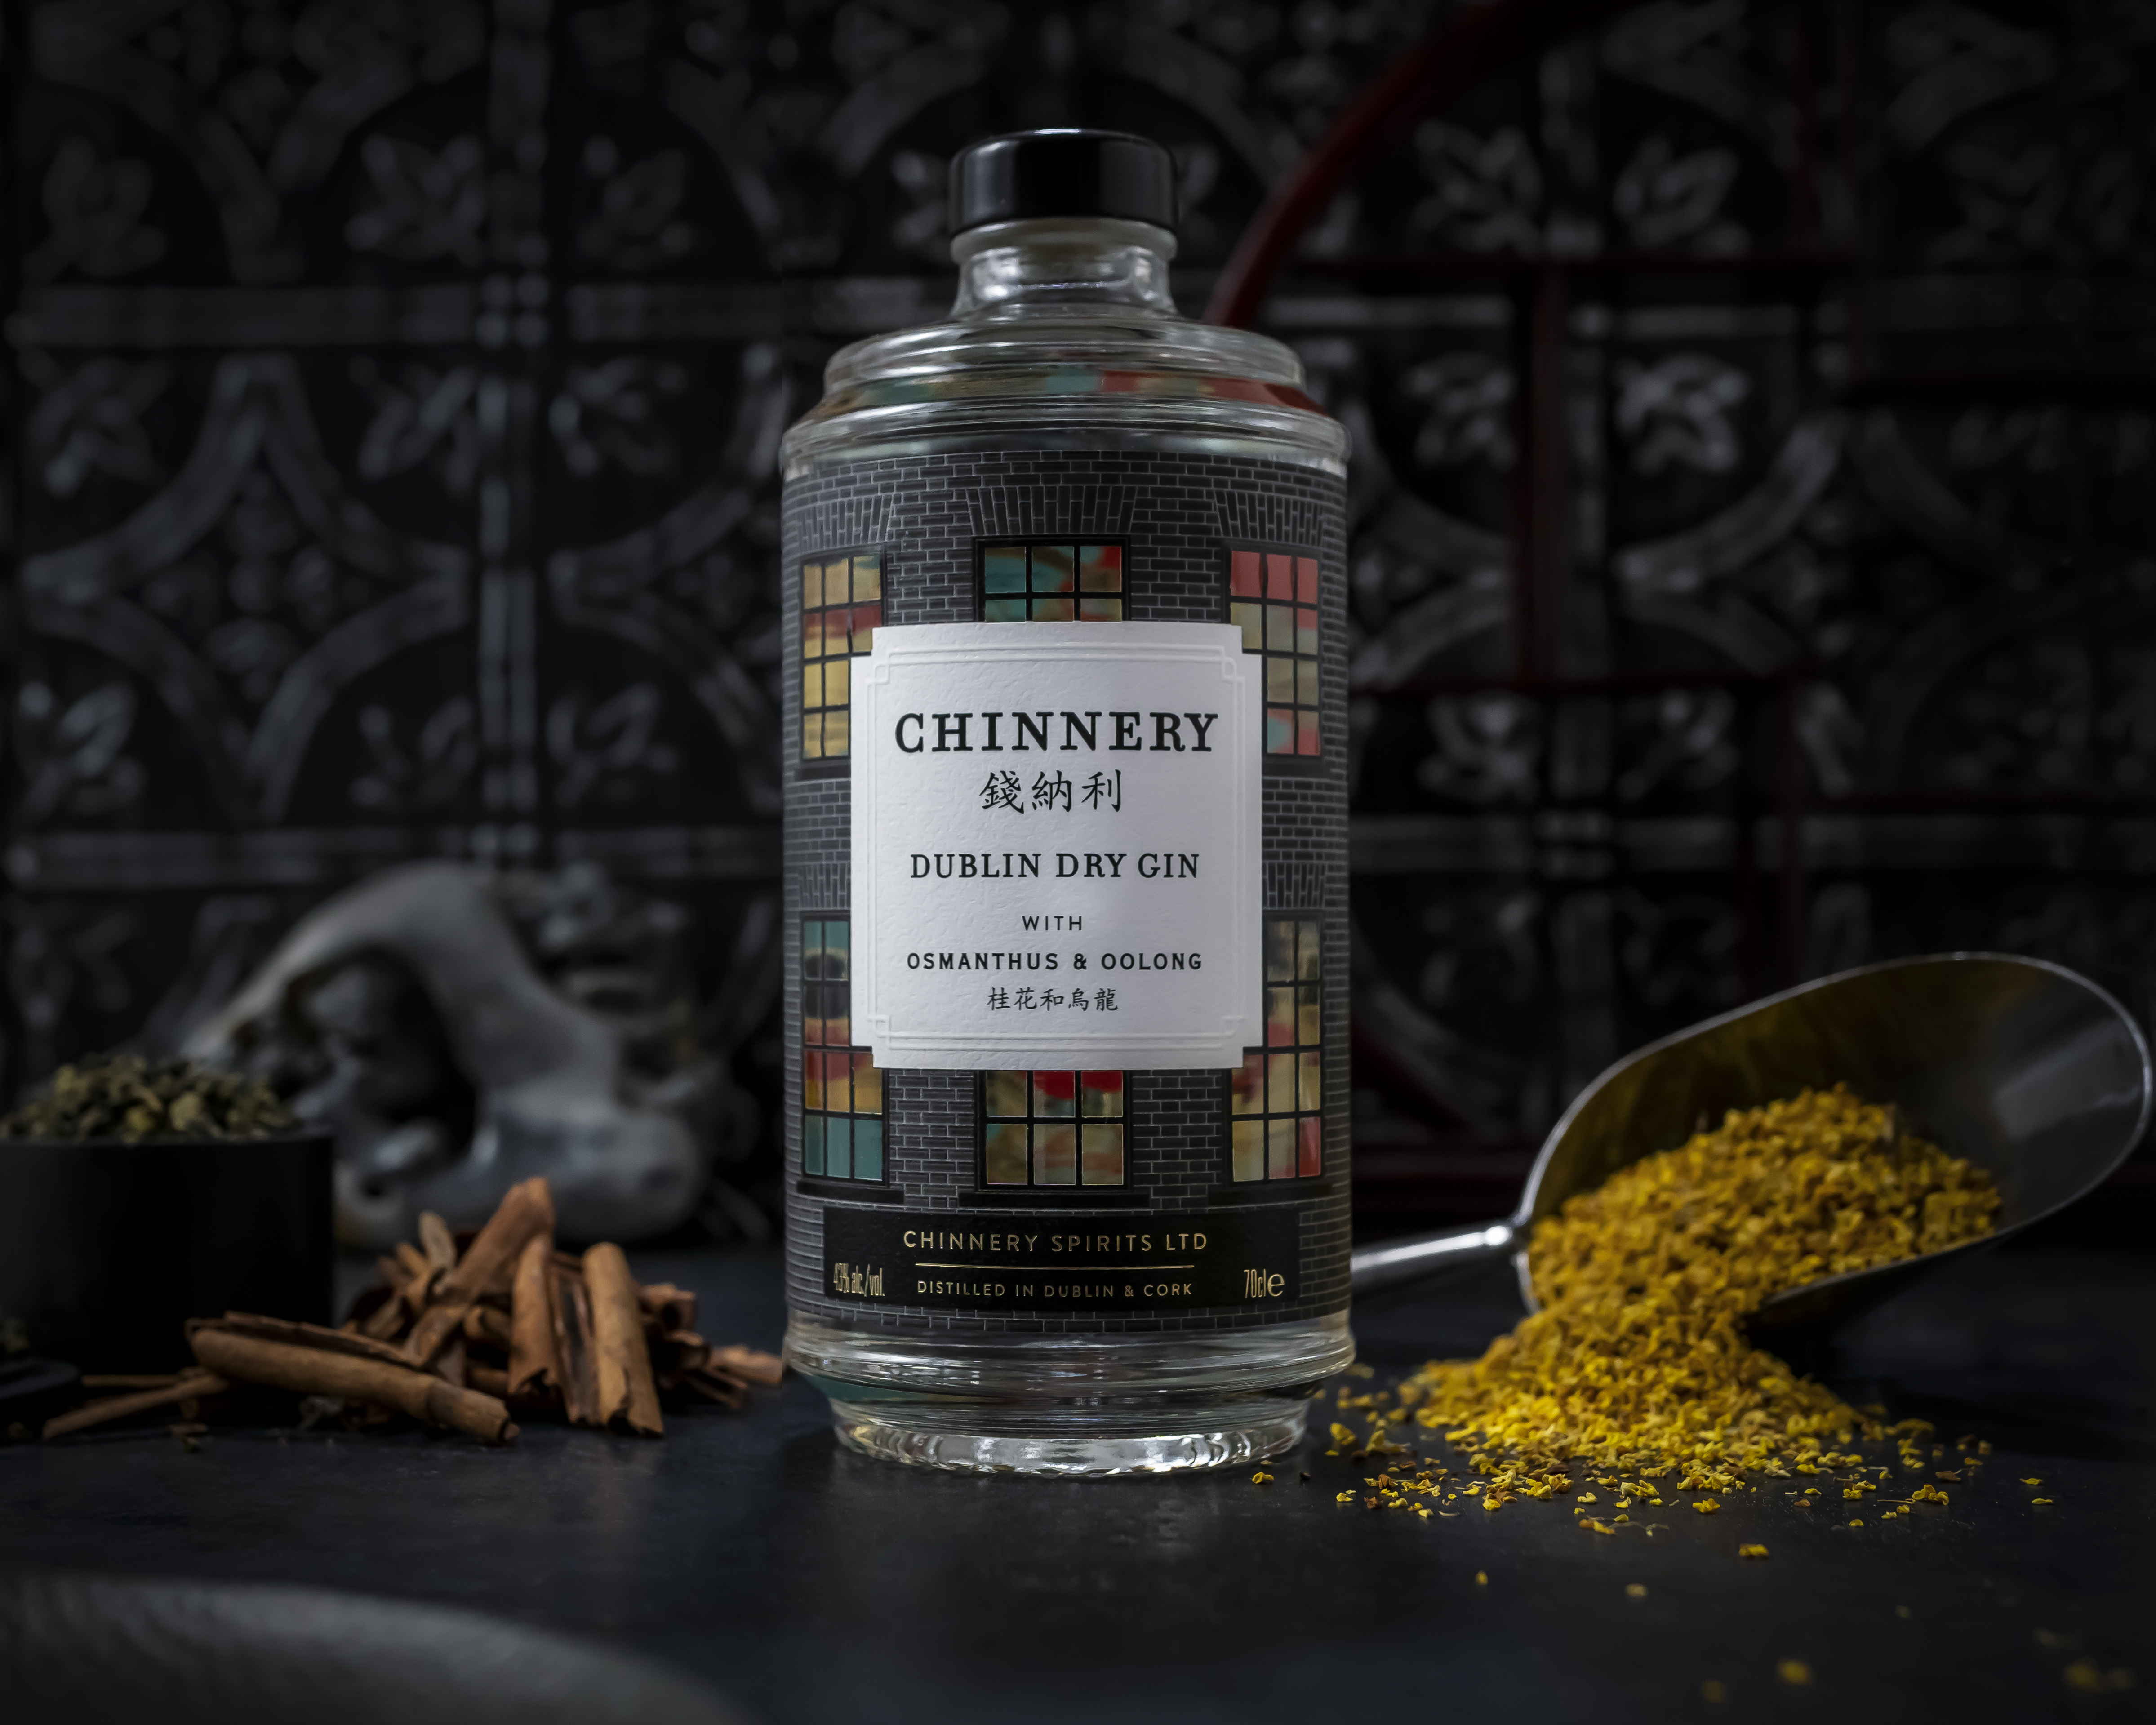 Chinnery Gin Bottle Shot with Botanicals